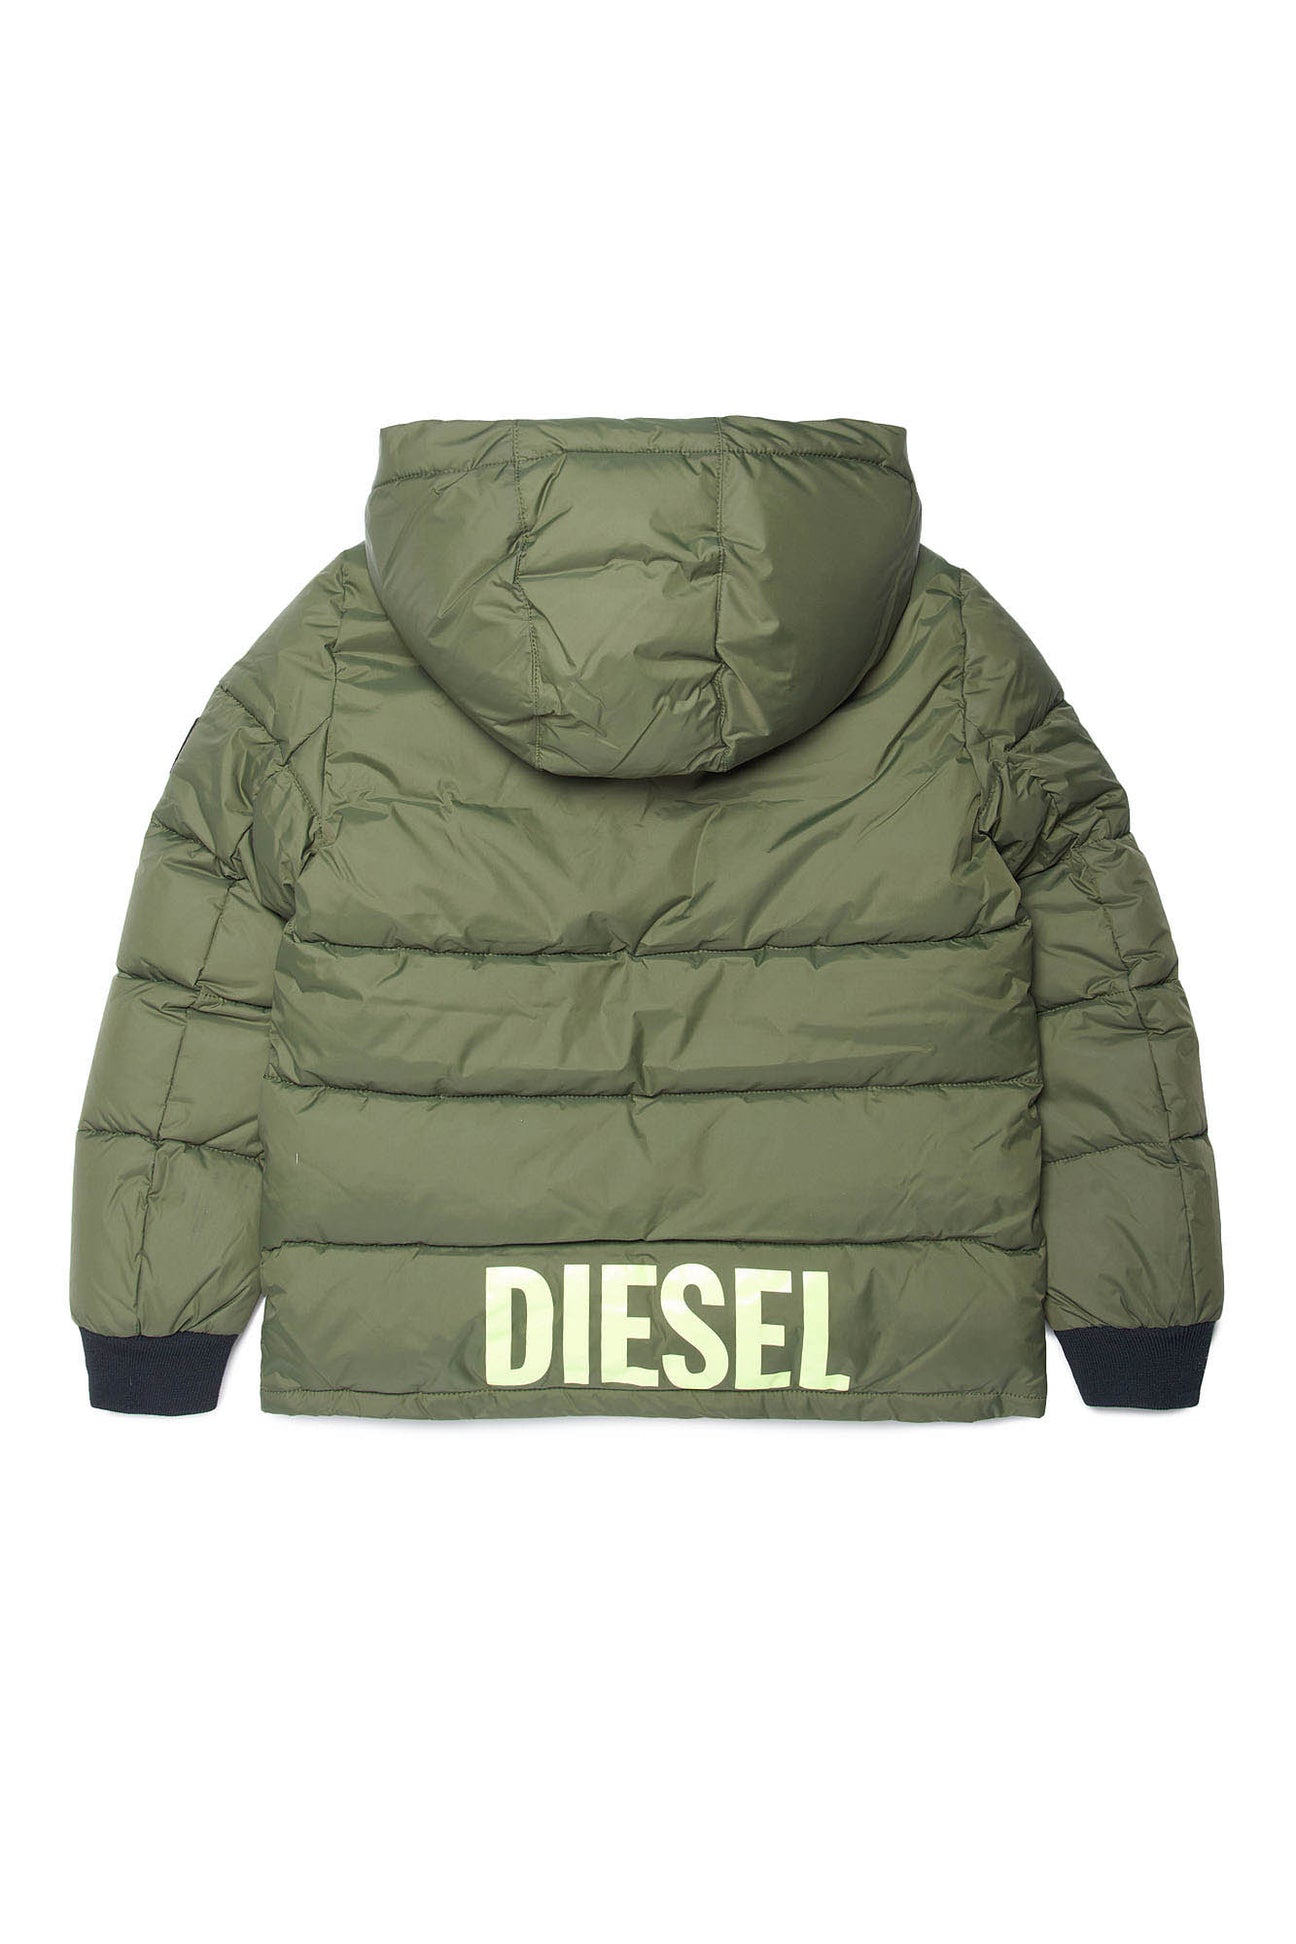 Green down jacket with Diesel logo on the back Green down jacket with Diesel logo on the back